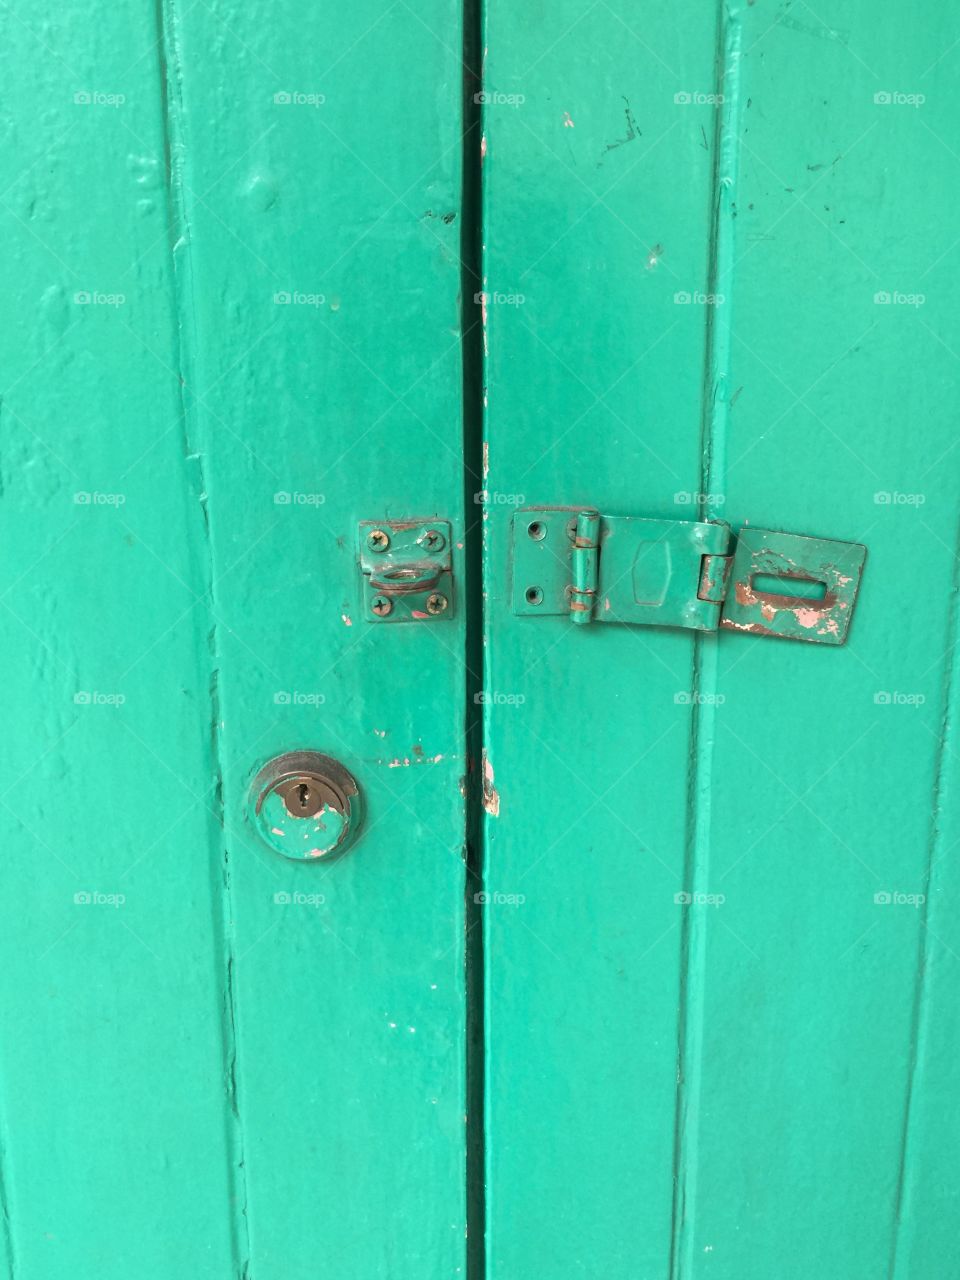 Turquoise door, no lock, no safe, but antique style 